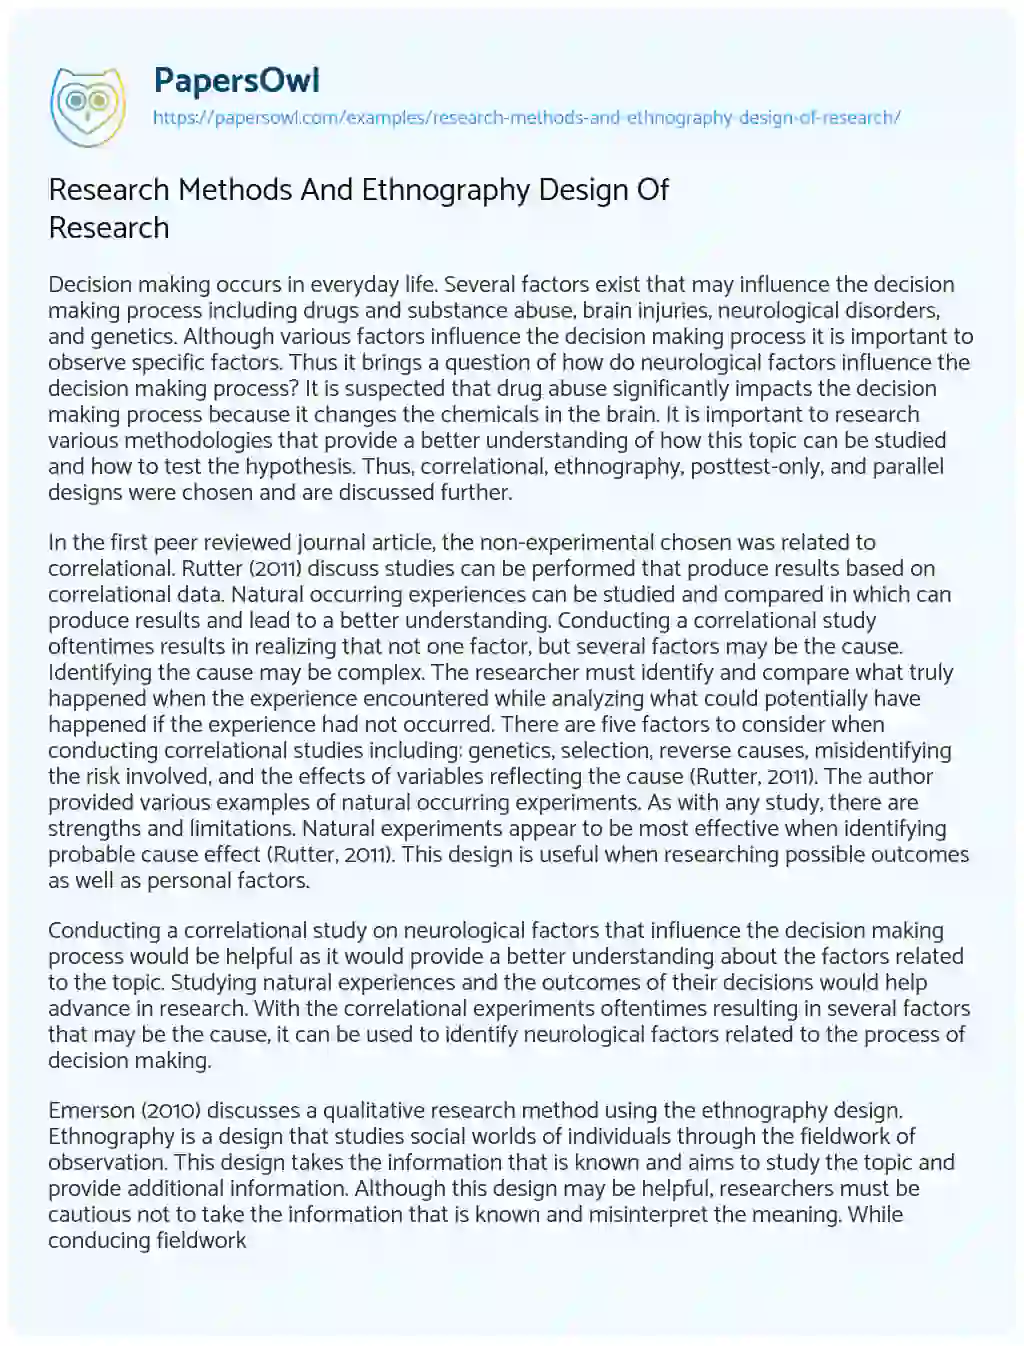 Essay on Research Methods and Ethnography Design of Research